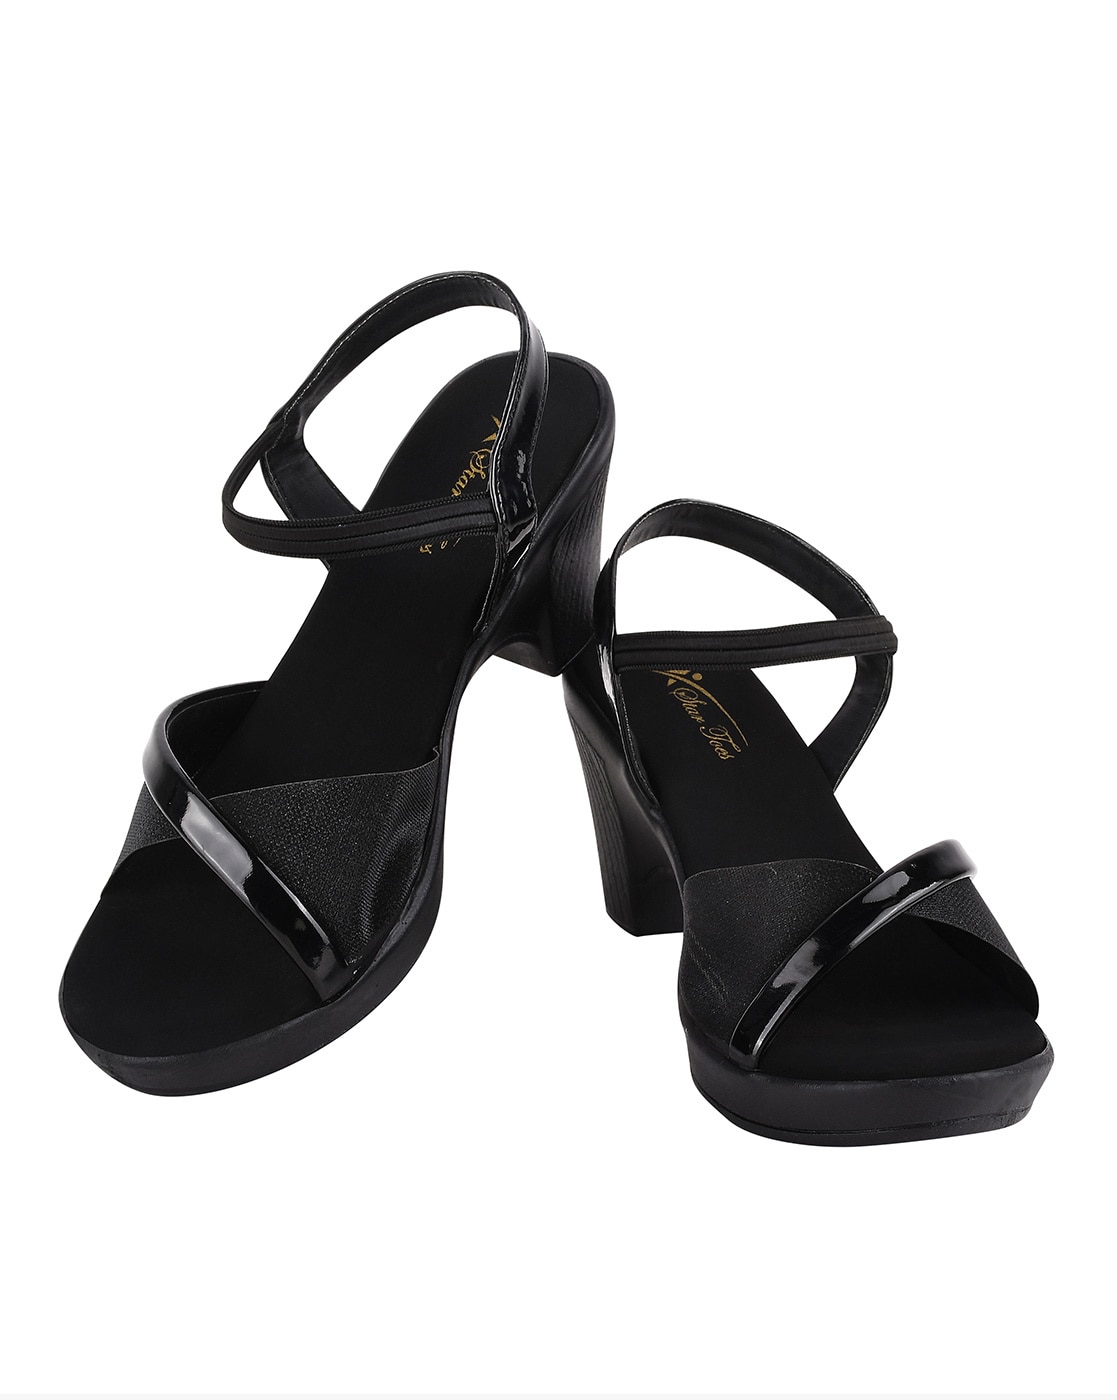 Women's Ankle Adjustable Strap Heel Sandals | Trary